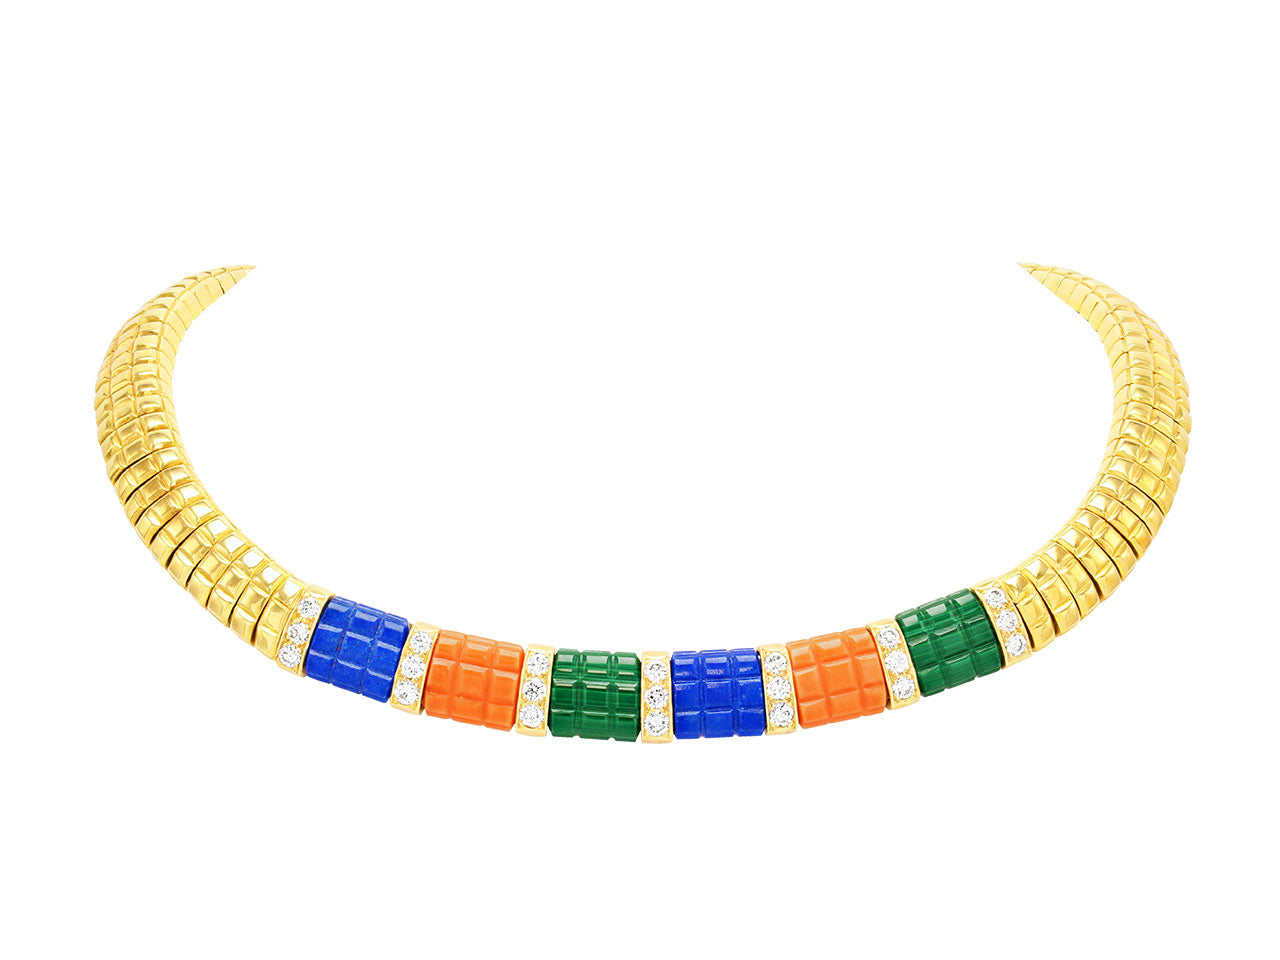 Van Cleef & Arpels Suite of Coral, Lapis, Malachite and Diamond and 18K Jewelry